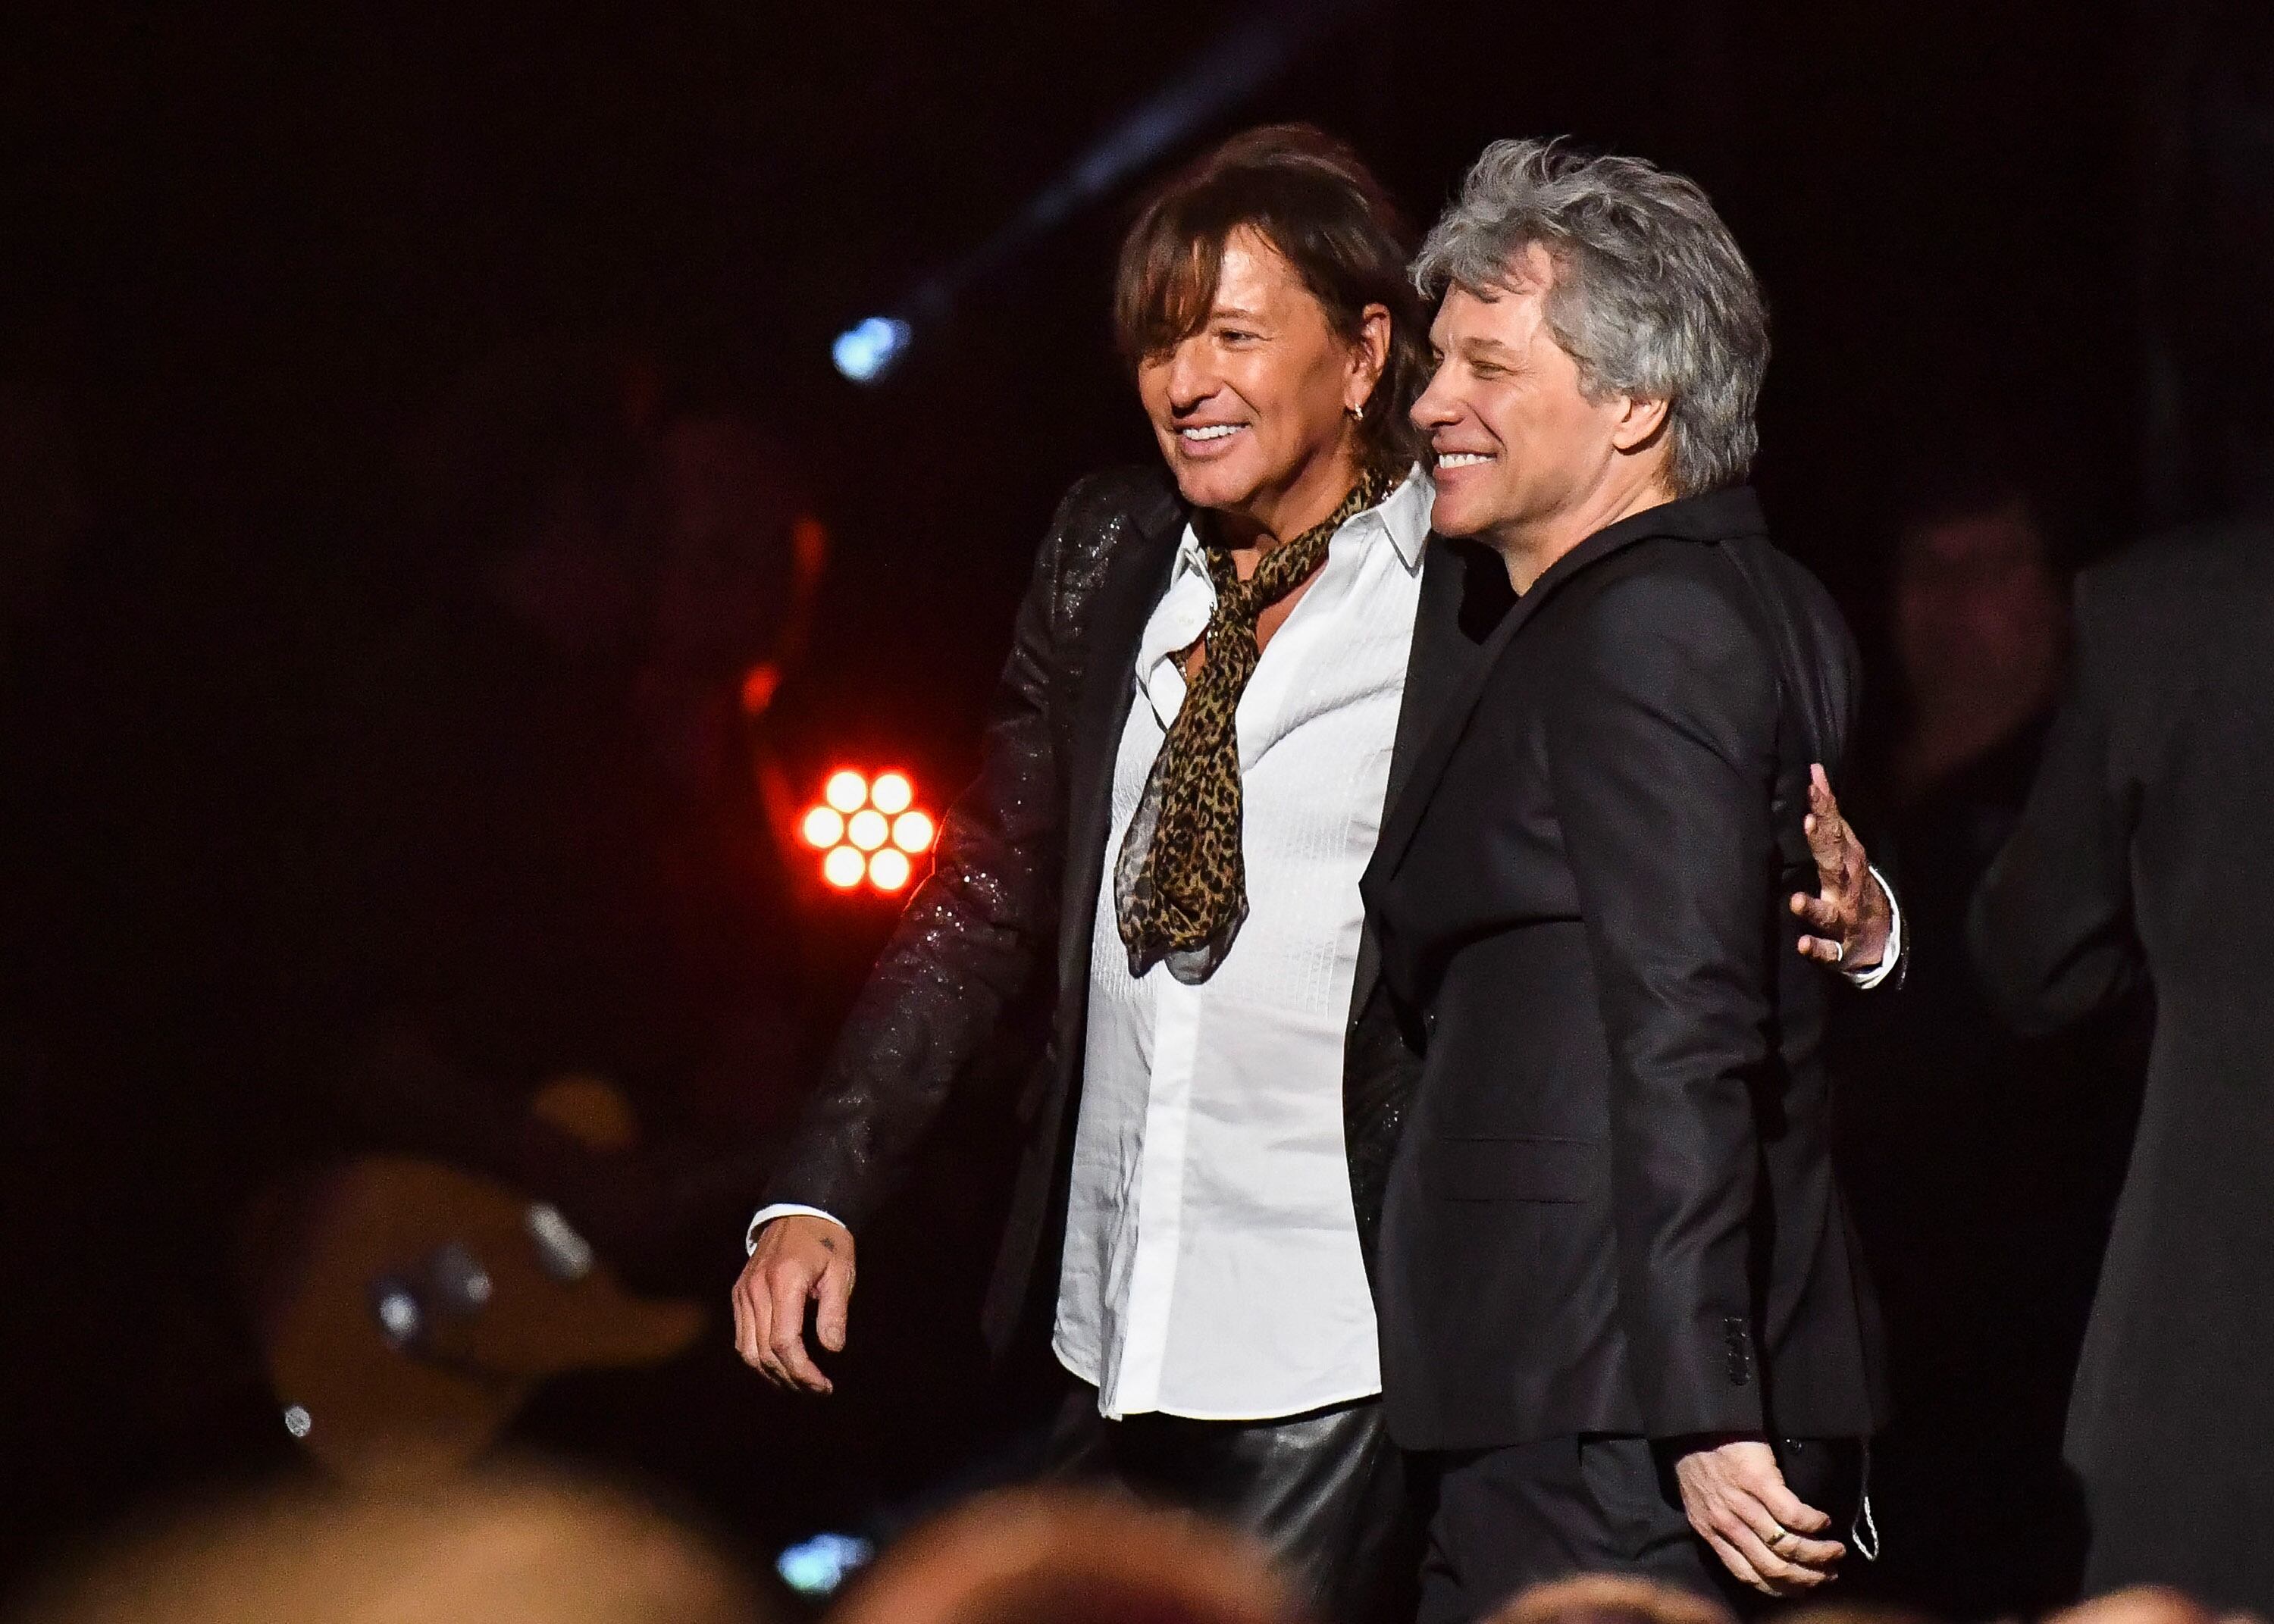 Jon Bon Jovi and Richie Sambora, at the 33rd annual Rock & Roll Hall of Fame ceremony, in Cleveland, Ohio, on April 14, 2018.